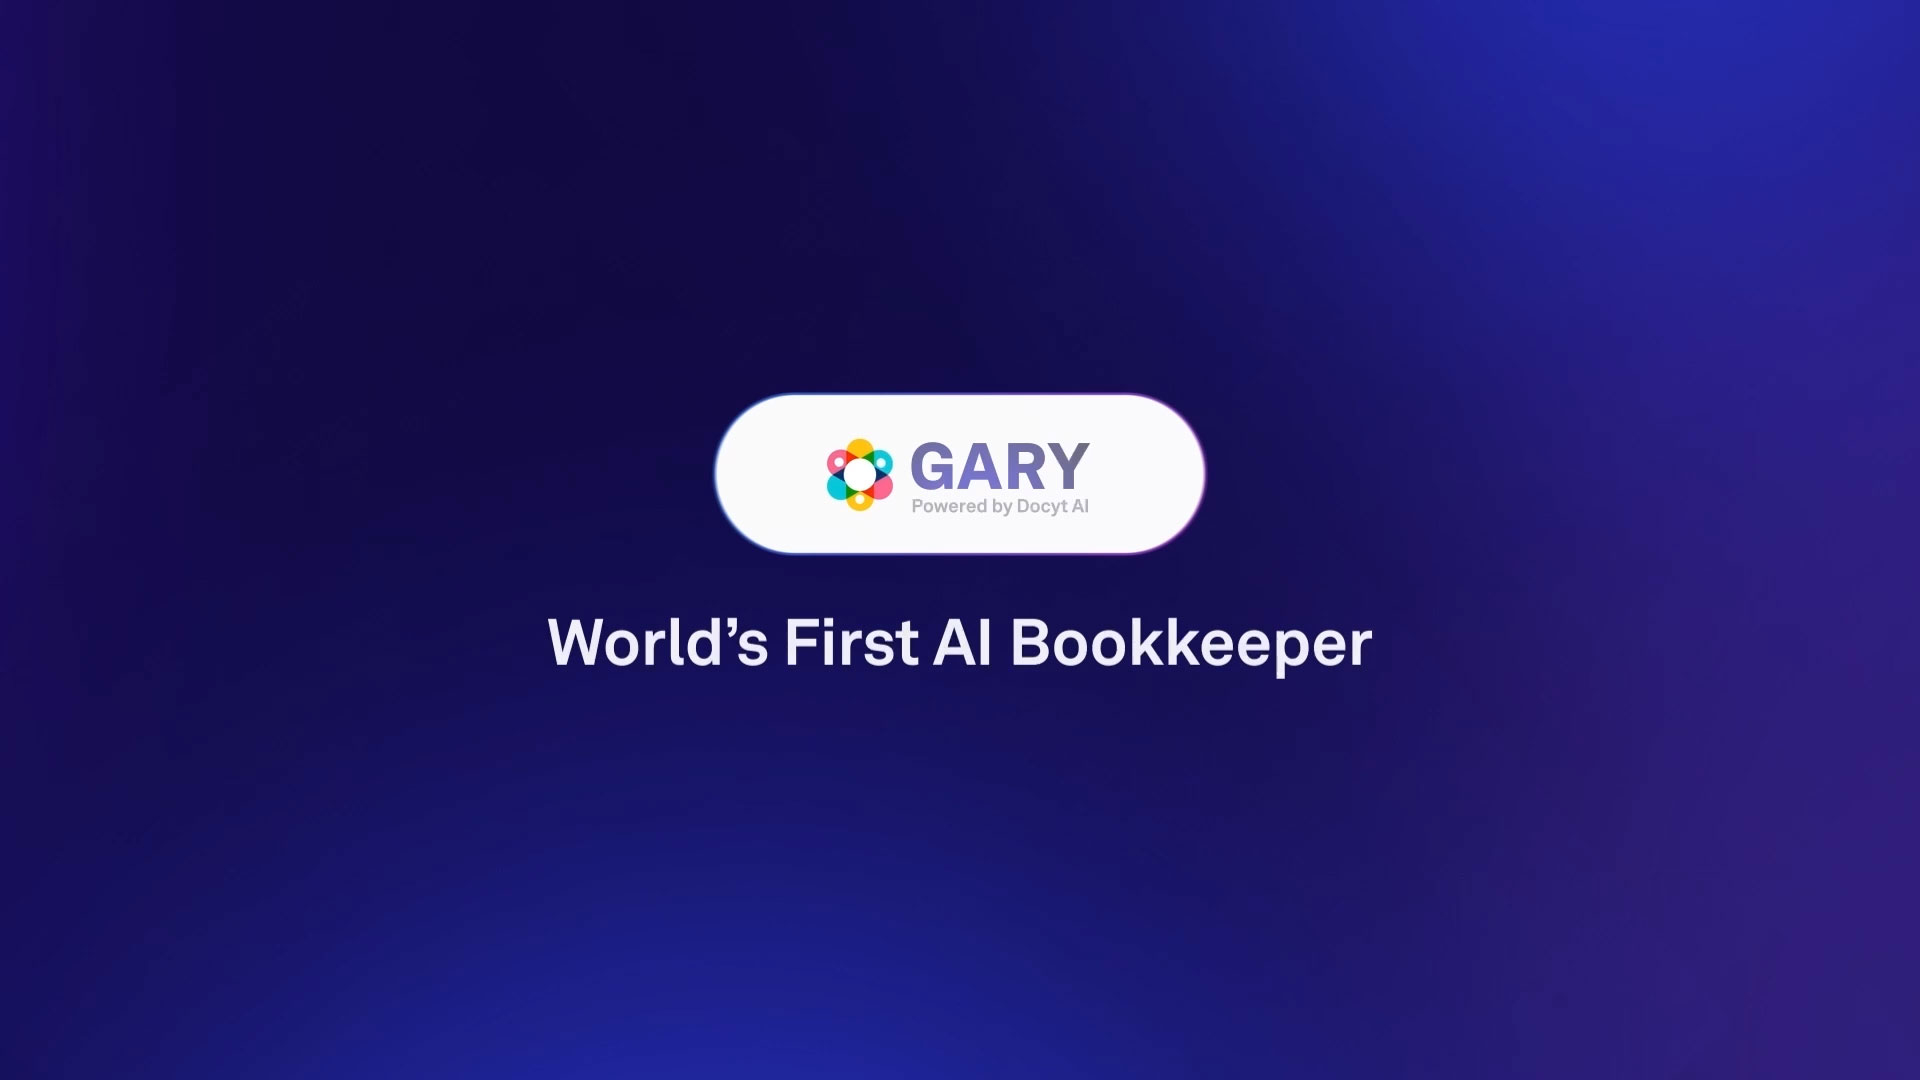 Docyt AI unveils GARY, the world's first AI bookkeeper. GARY combines Precision and Predictive AI models with Generative AI tools to streamline the digital back office for small and midsize businesses, automating manual bookkeeping processes and accelerating the month-end close from a matter of weeks to just 45 minutes.